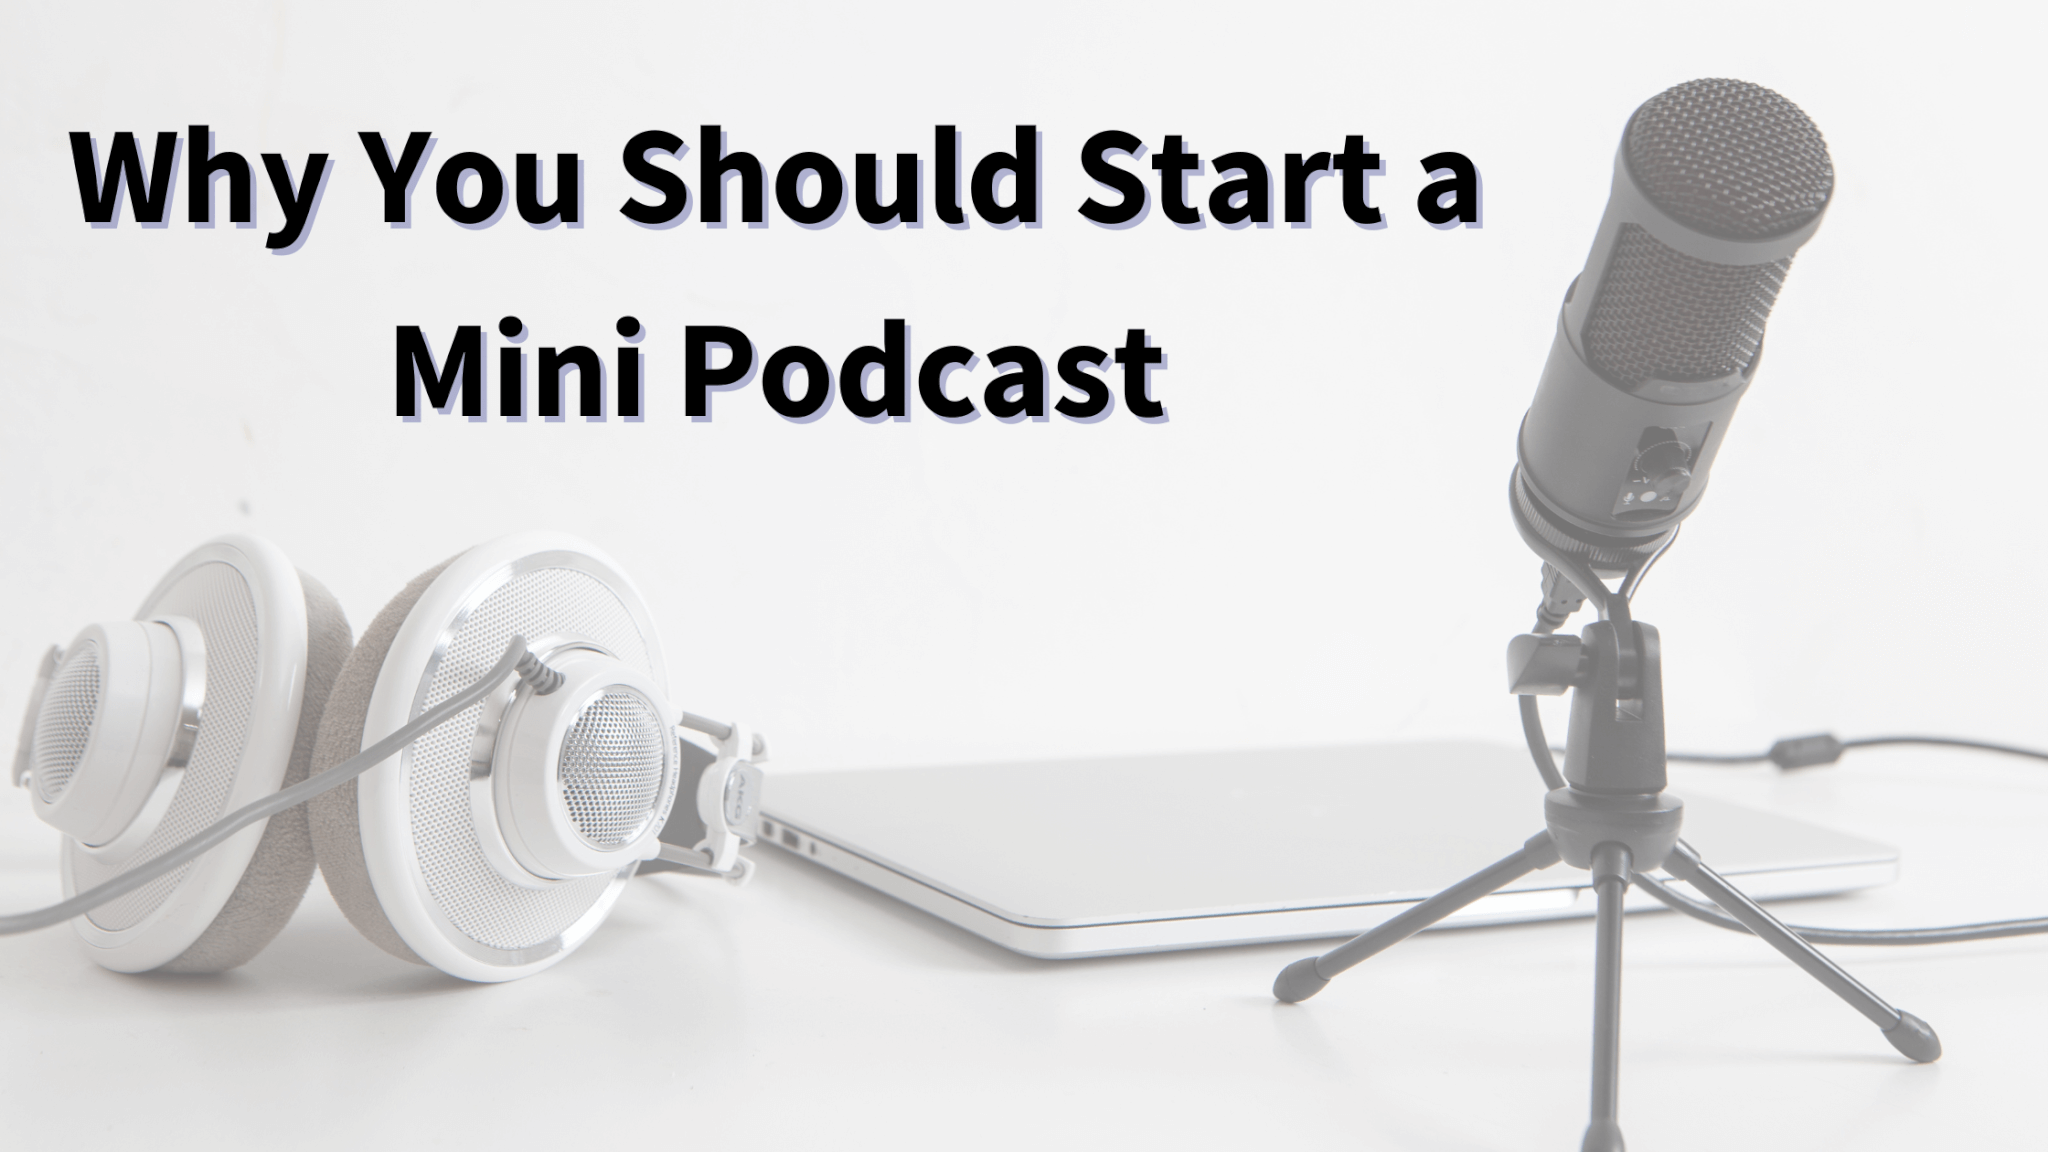 Why You Should Start a Mini Podcast